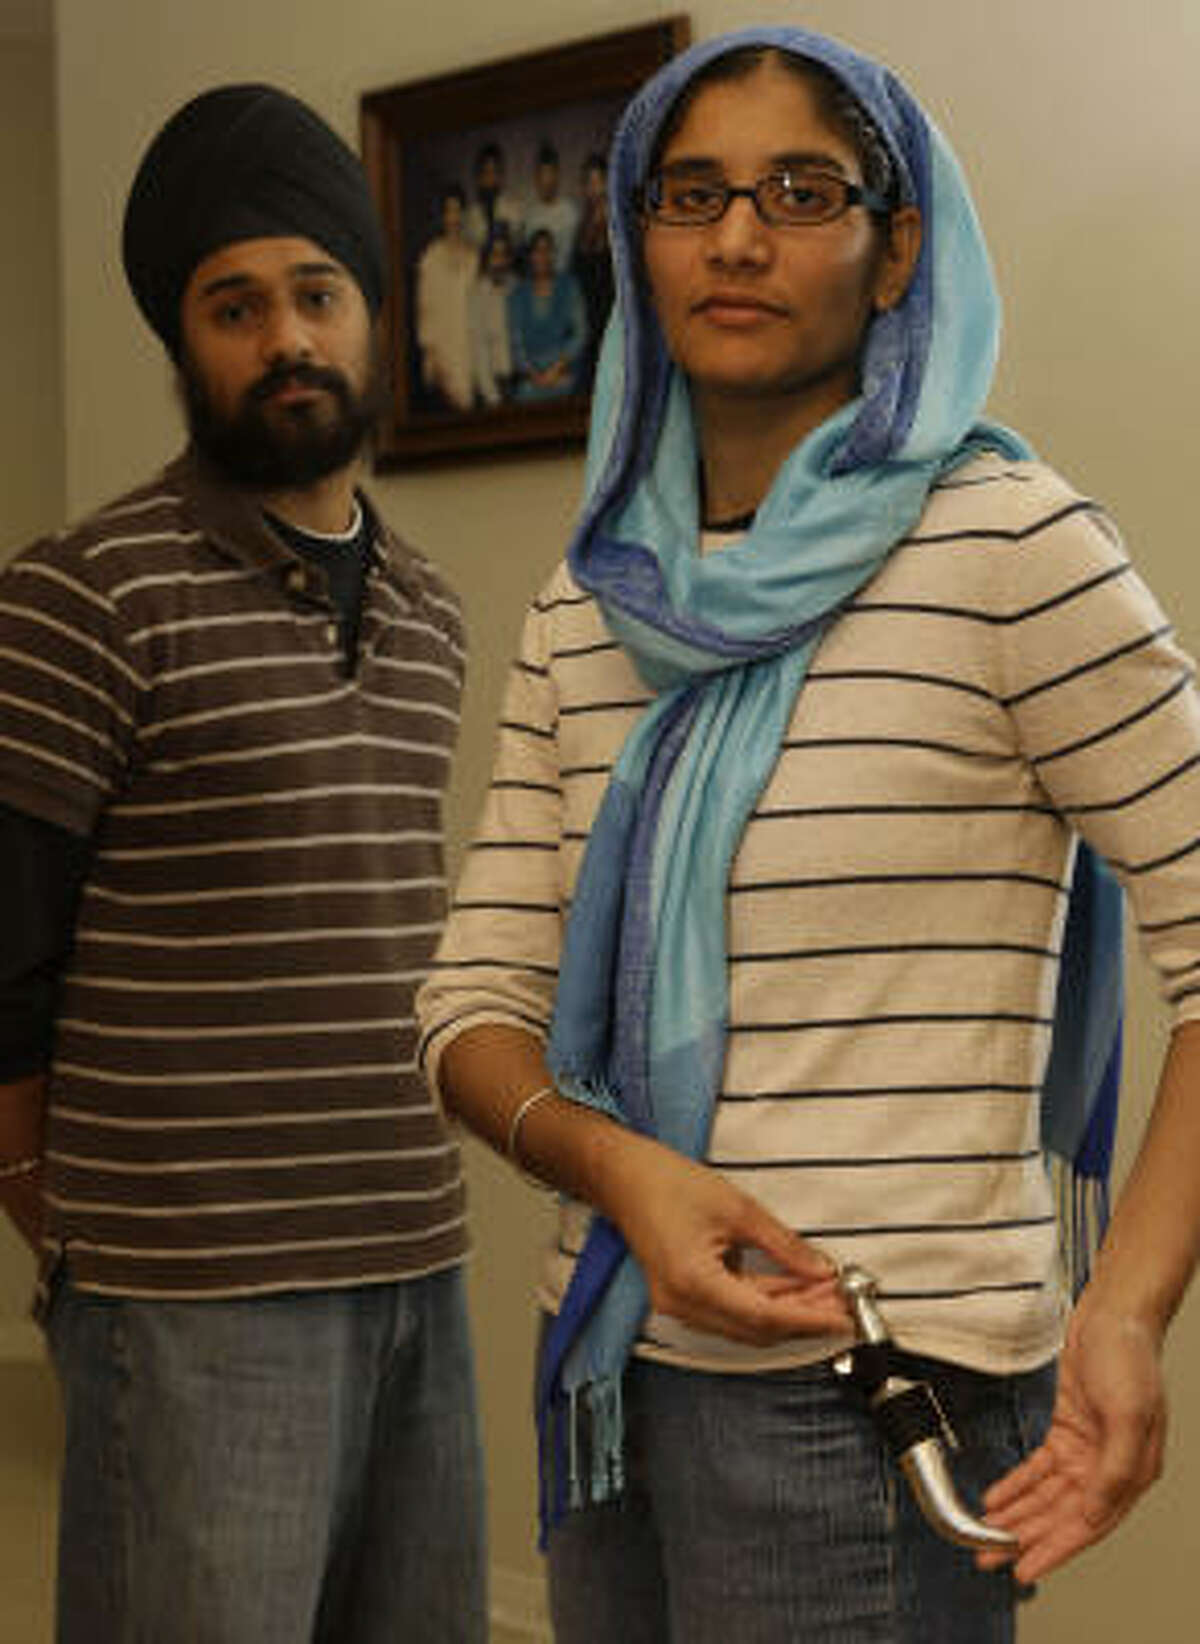 Kawaljeet Kaur Tagore, right, sued the Internal Revenue Service this week. The agency fired her for refusing to take off her kirpan while at work.